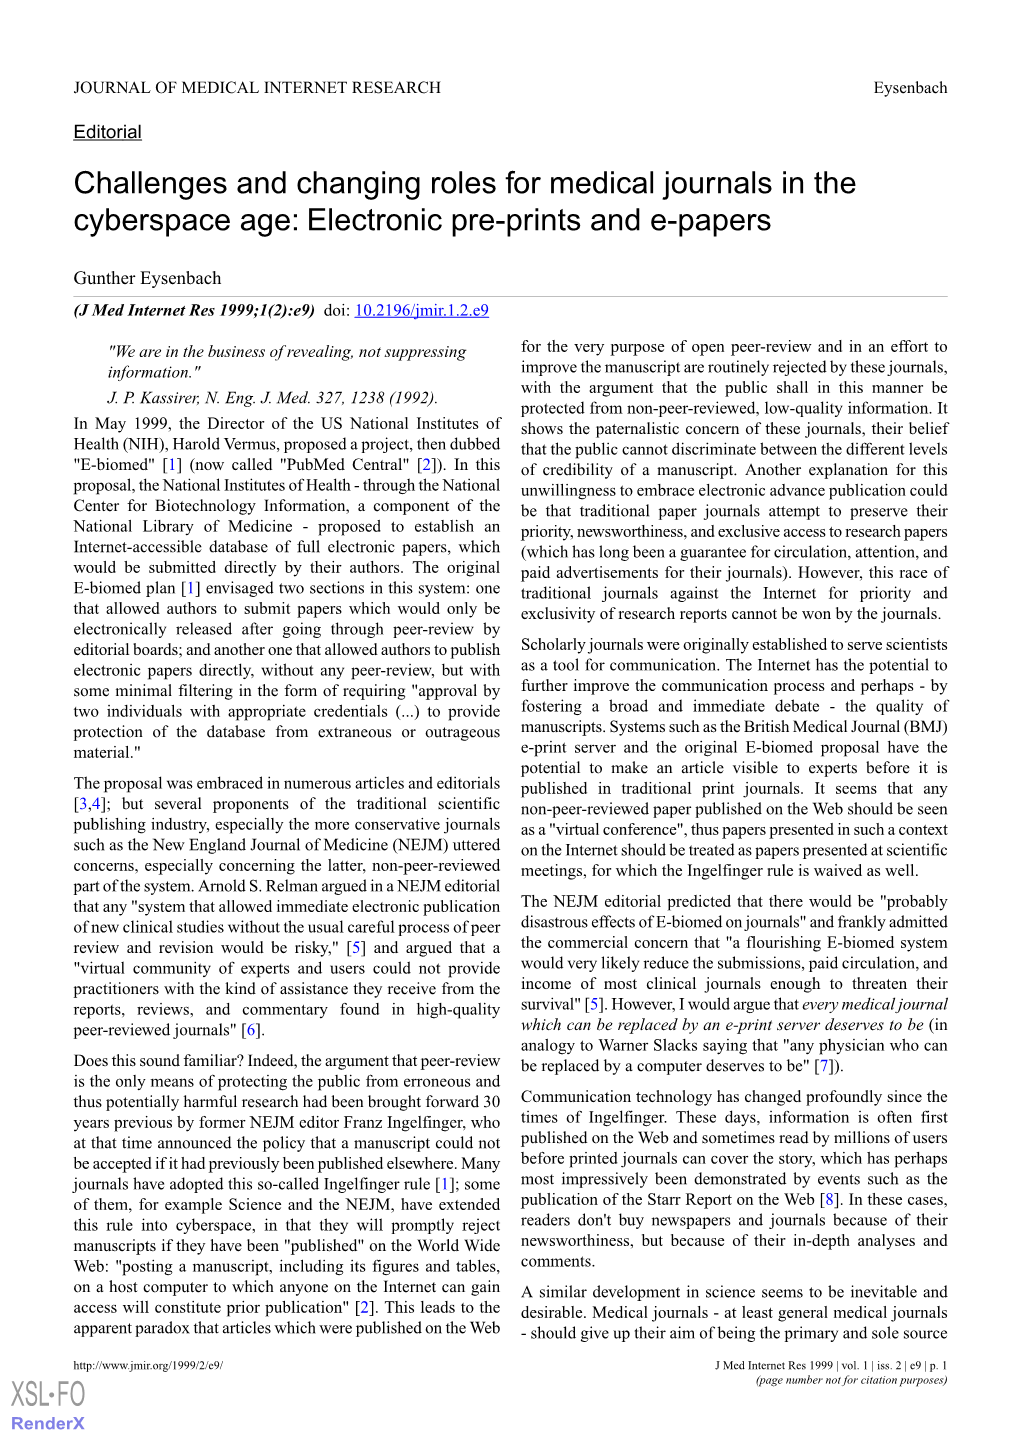 Challenges and Changing Roles for Medical Journals in the Cyberspace Age: Electronic Pre-Prints and E-Papers